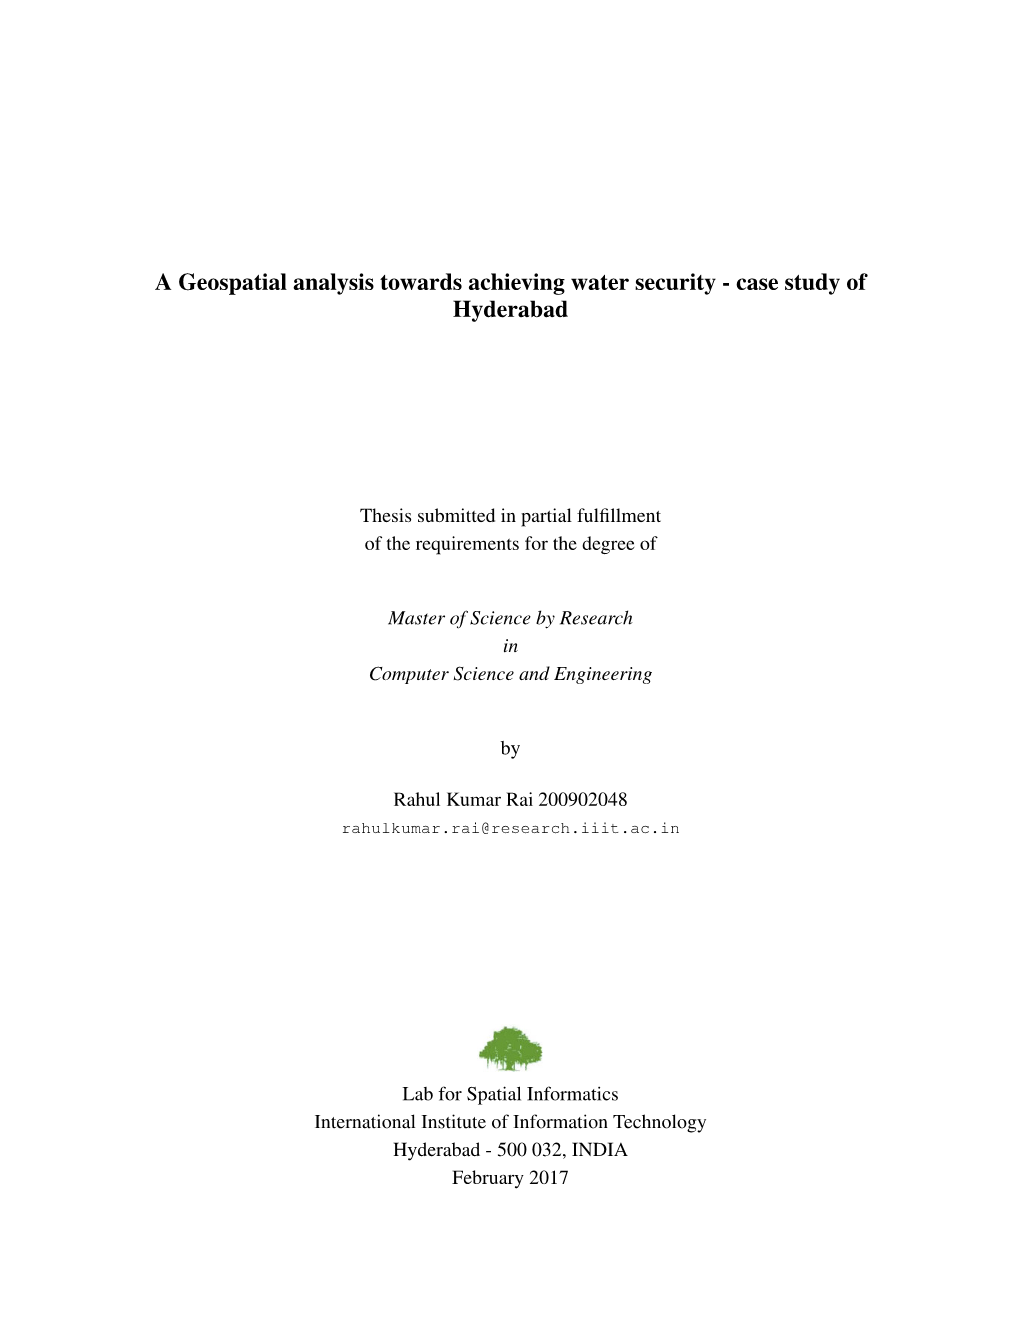 A Geospatial Analysis Towards Achieving Water Security - Case Study of Hyderabad